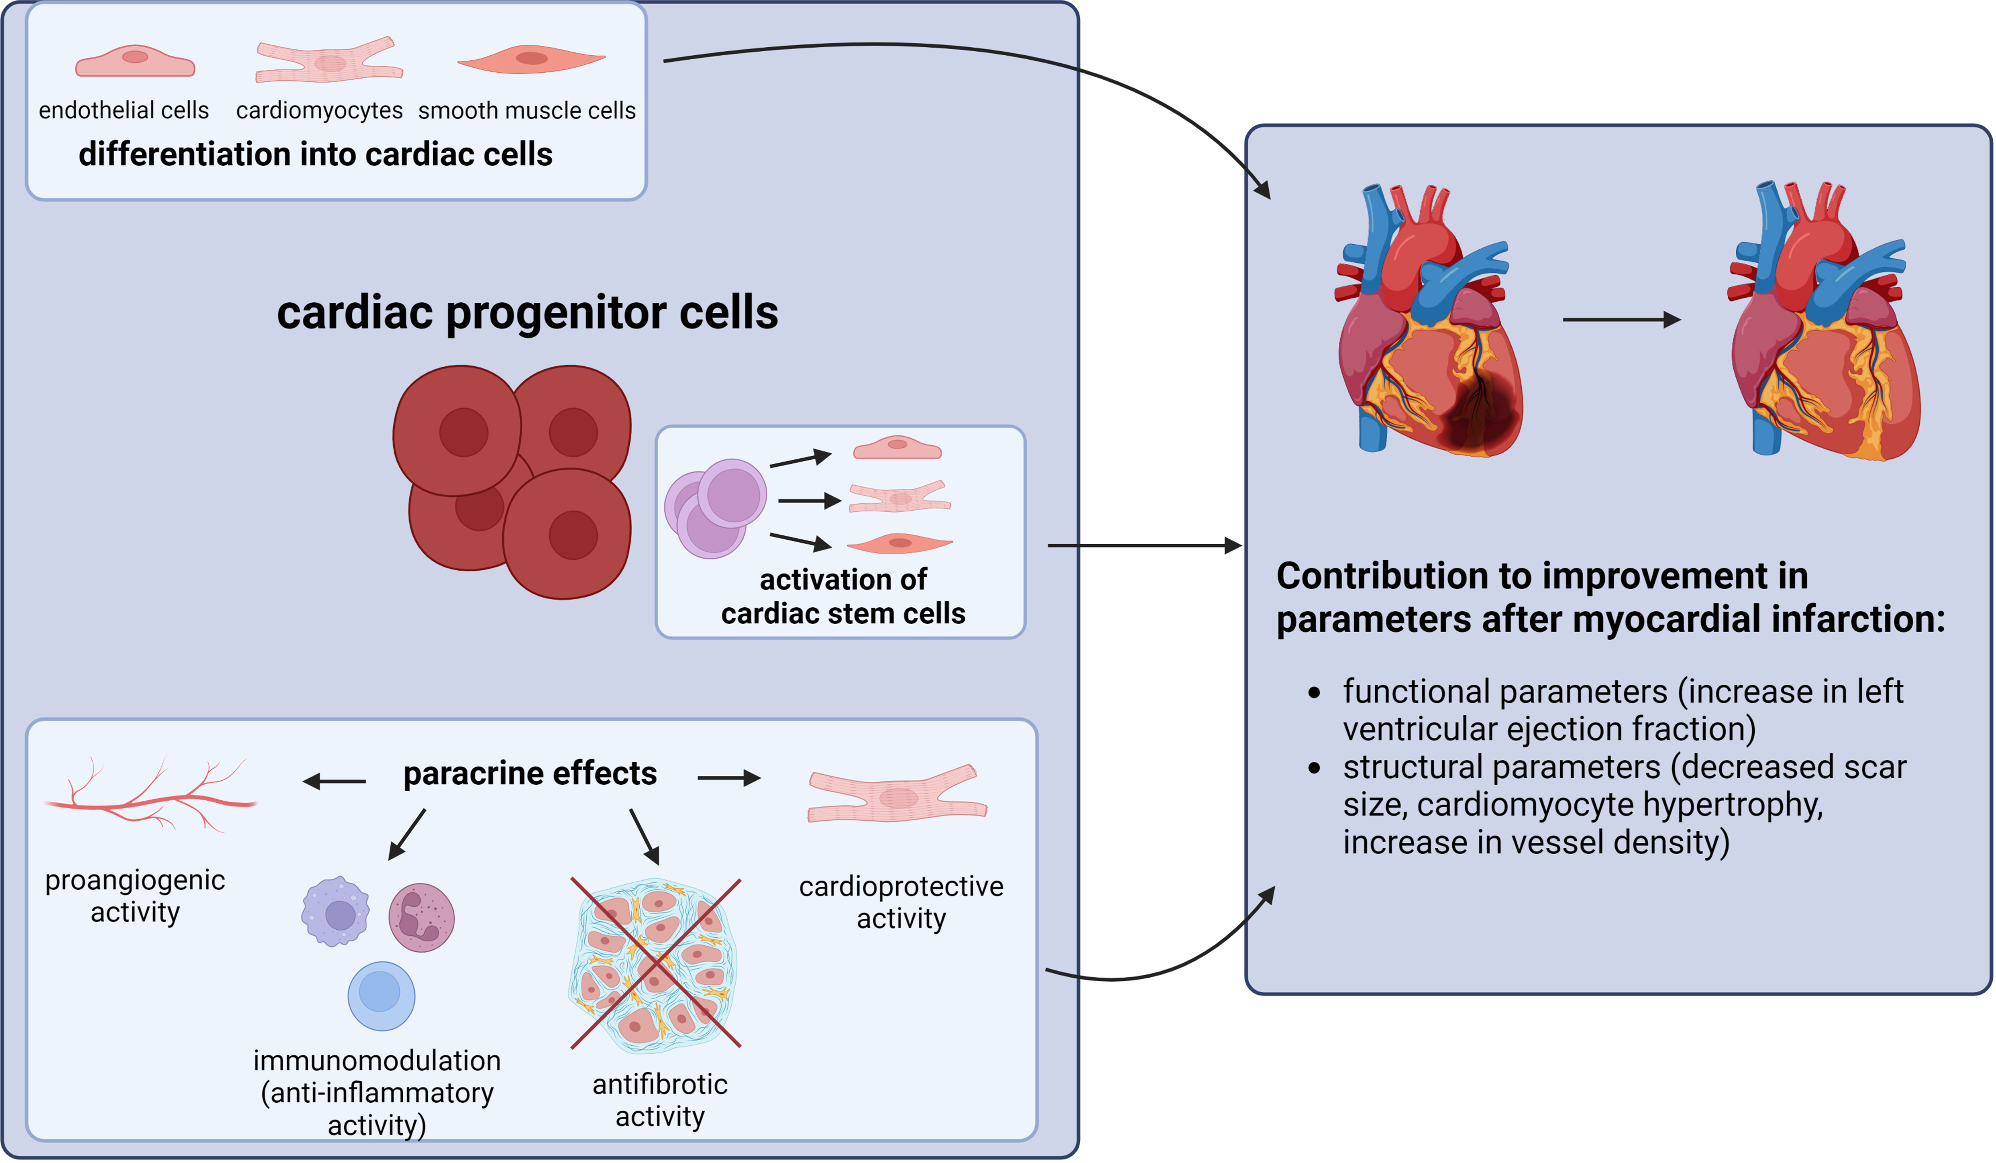 Cardiac progenitor cell therapy: mechanisms of action